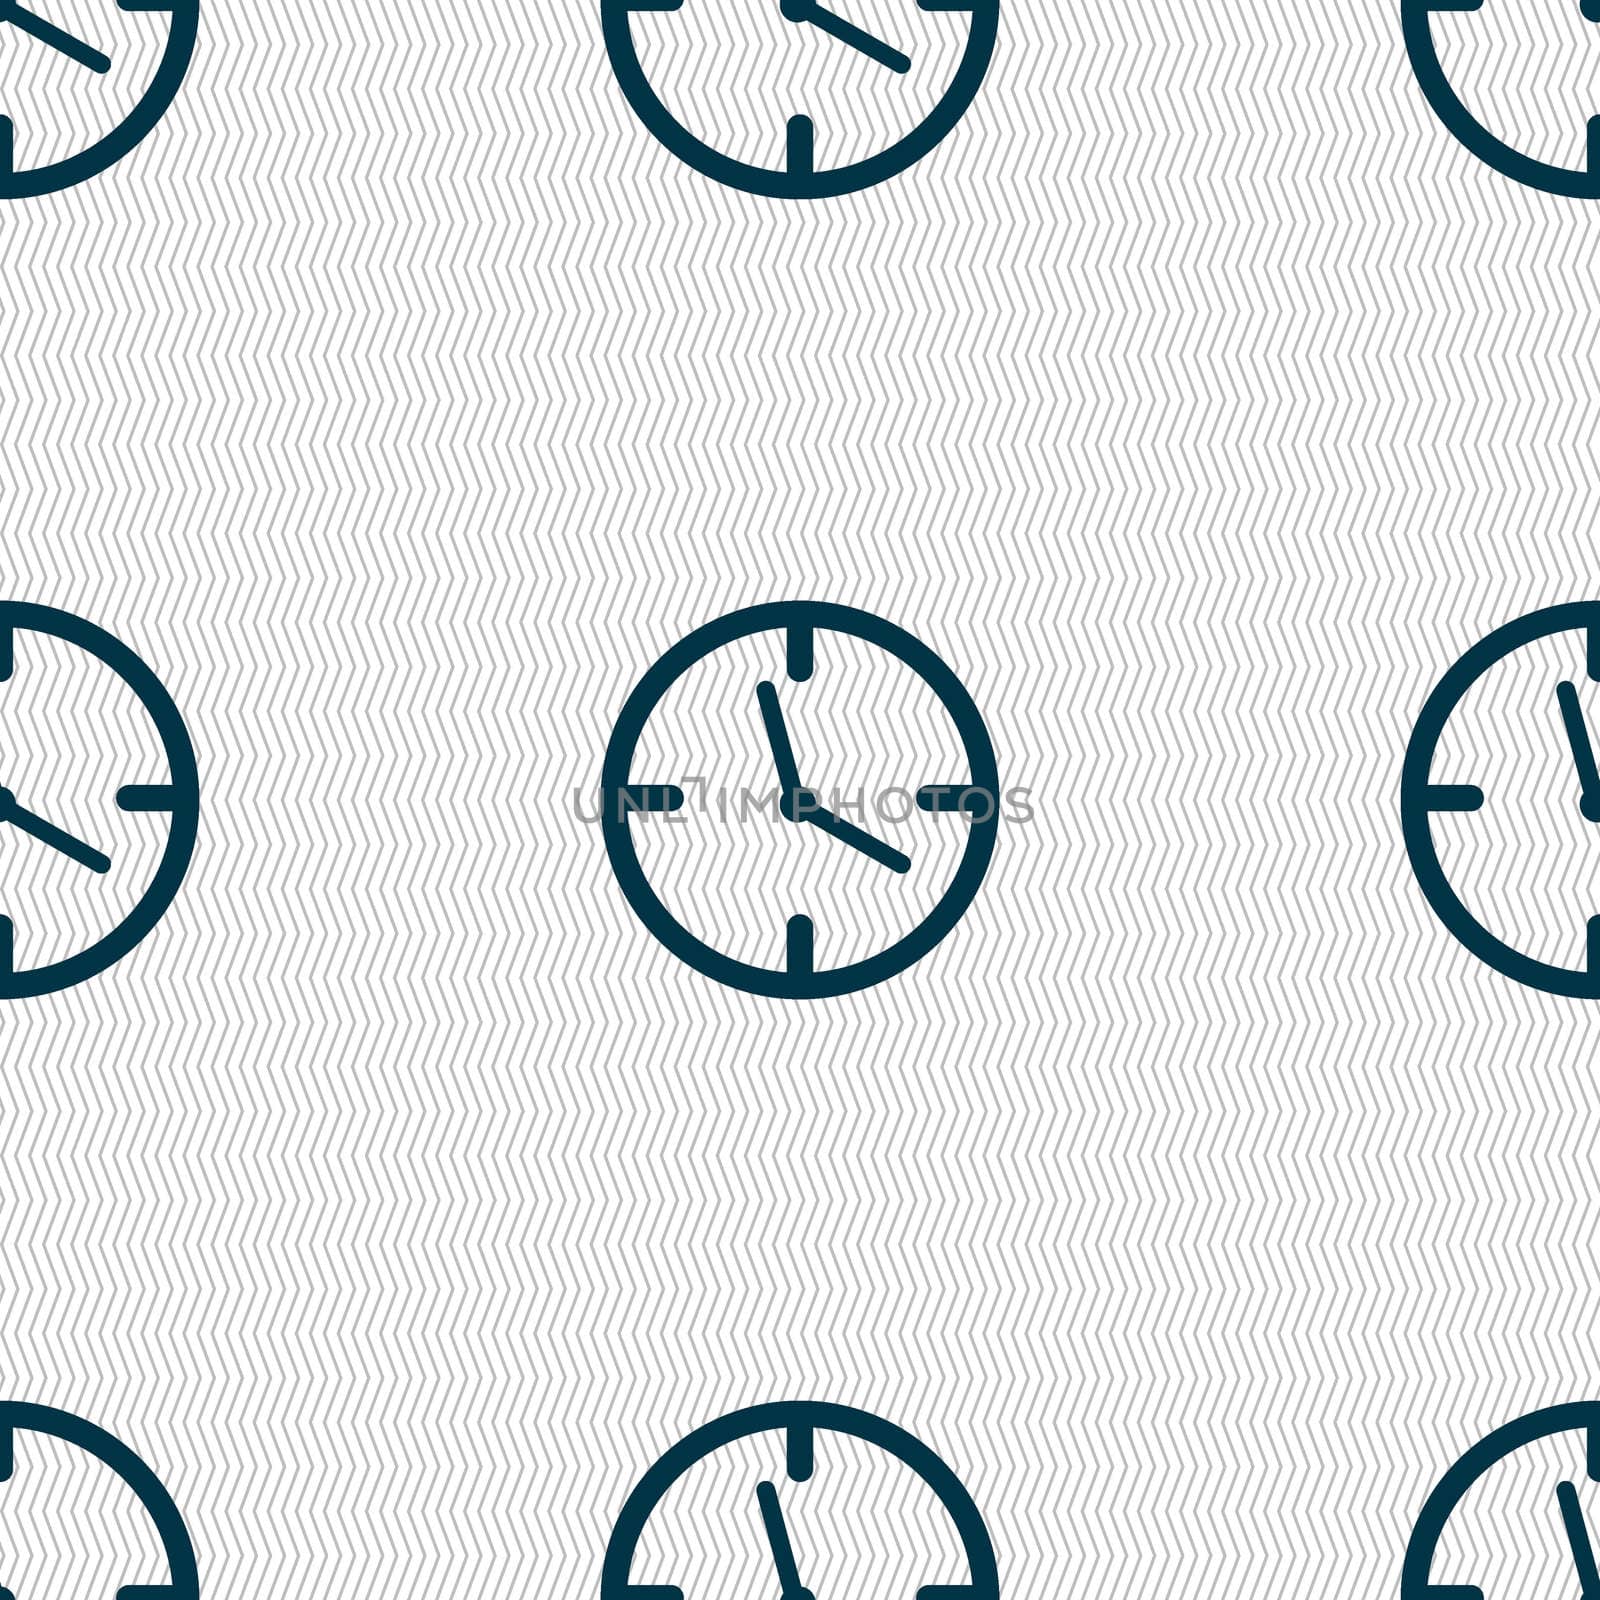 Clock time sign icon. Mechanical watch symbol. Seamless abstract background with geometric shapes. illustration